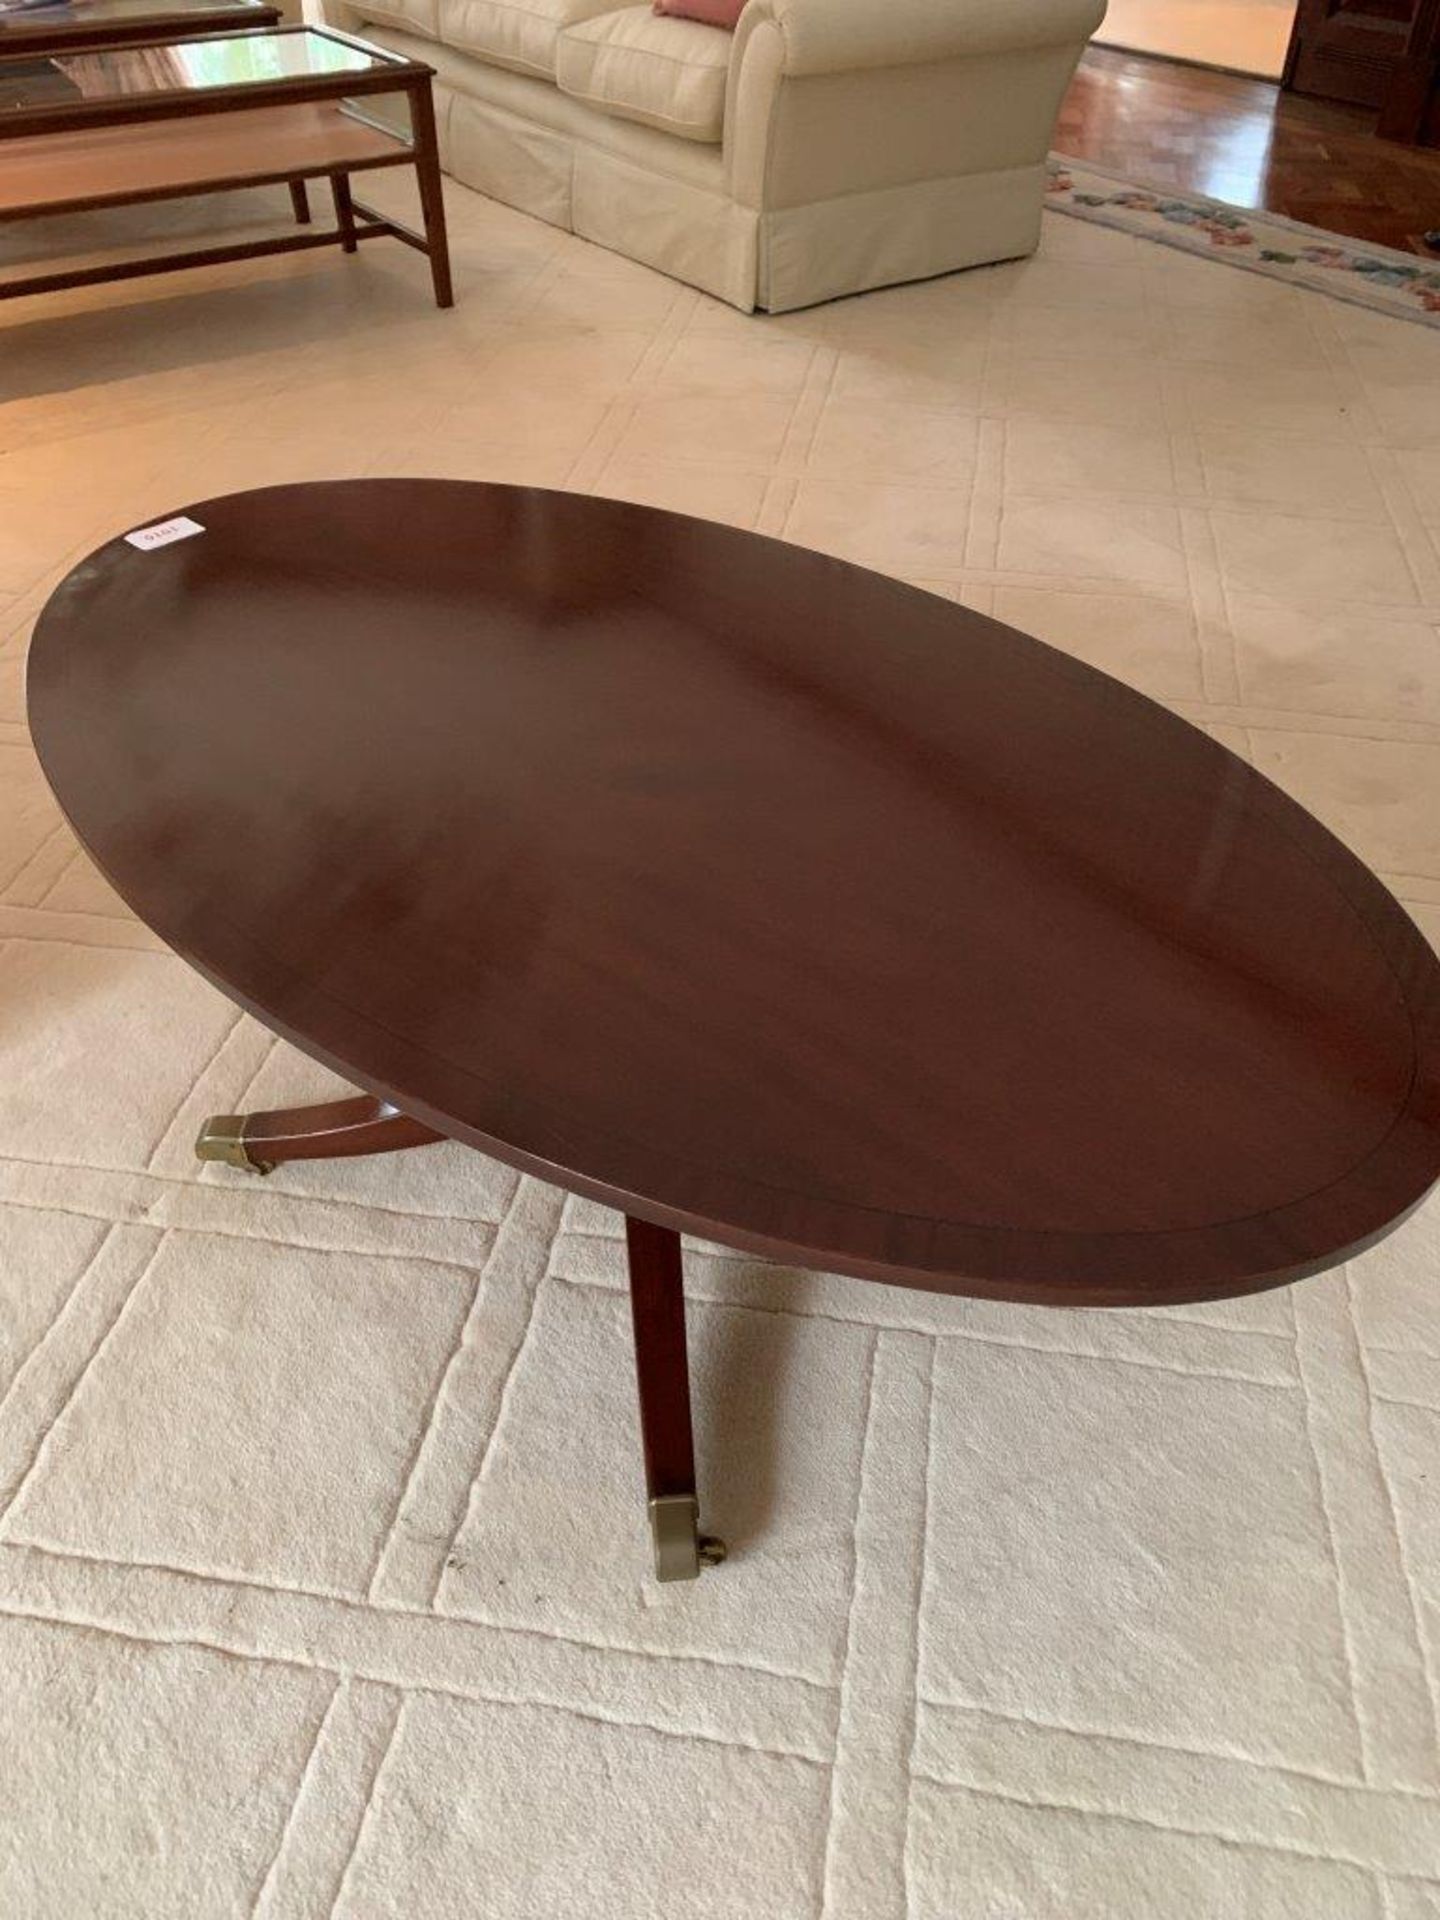 Mahogany oval top coffee table - Image 4 of 4